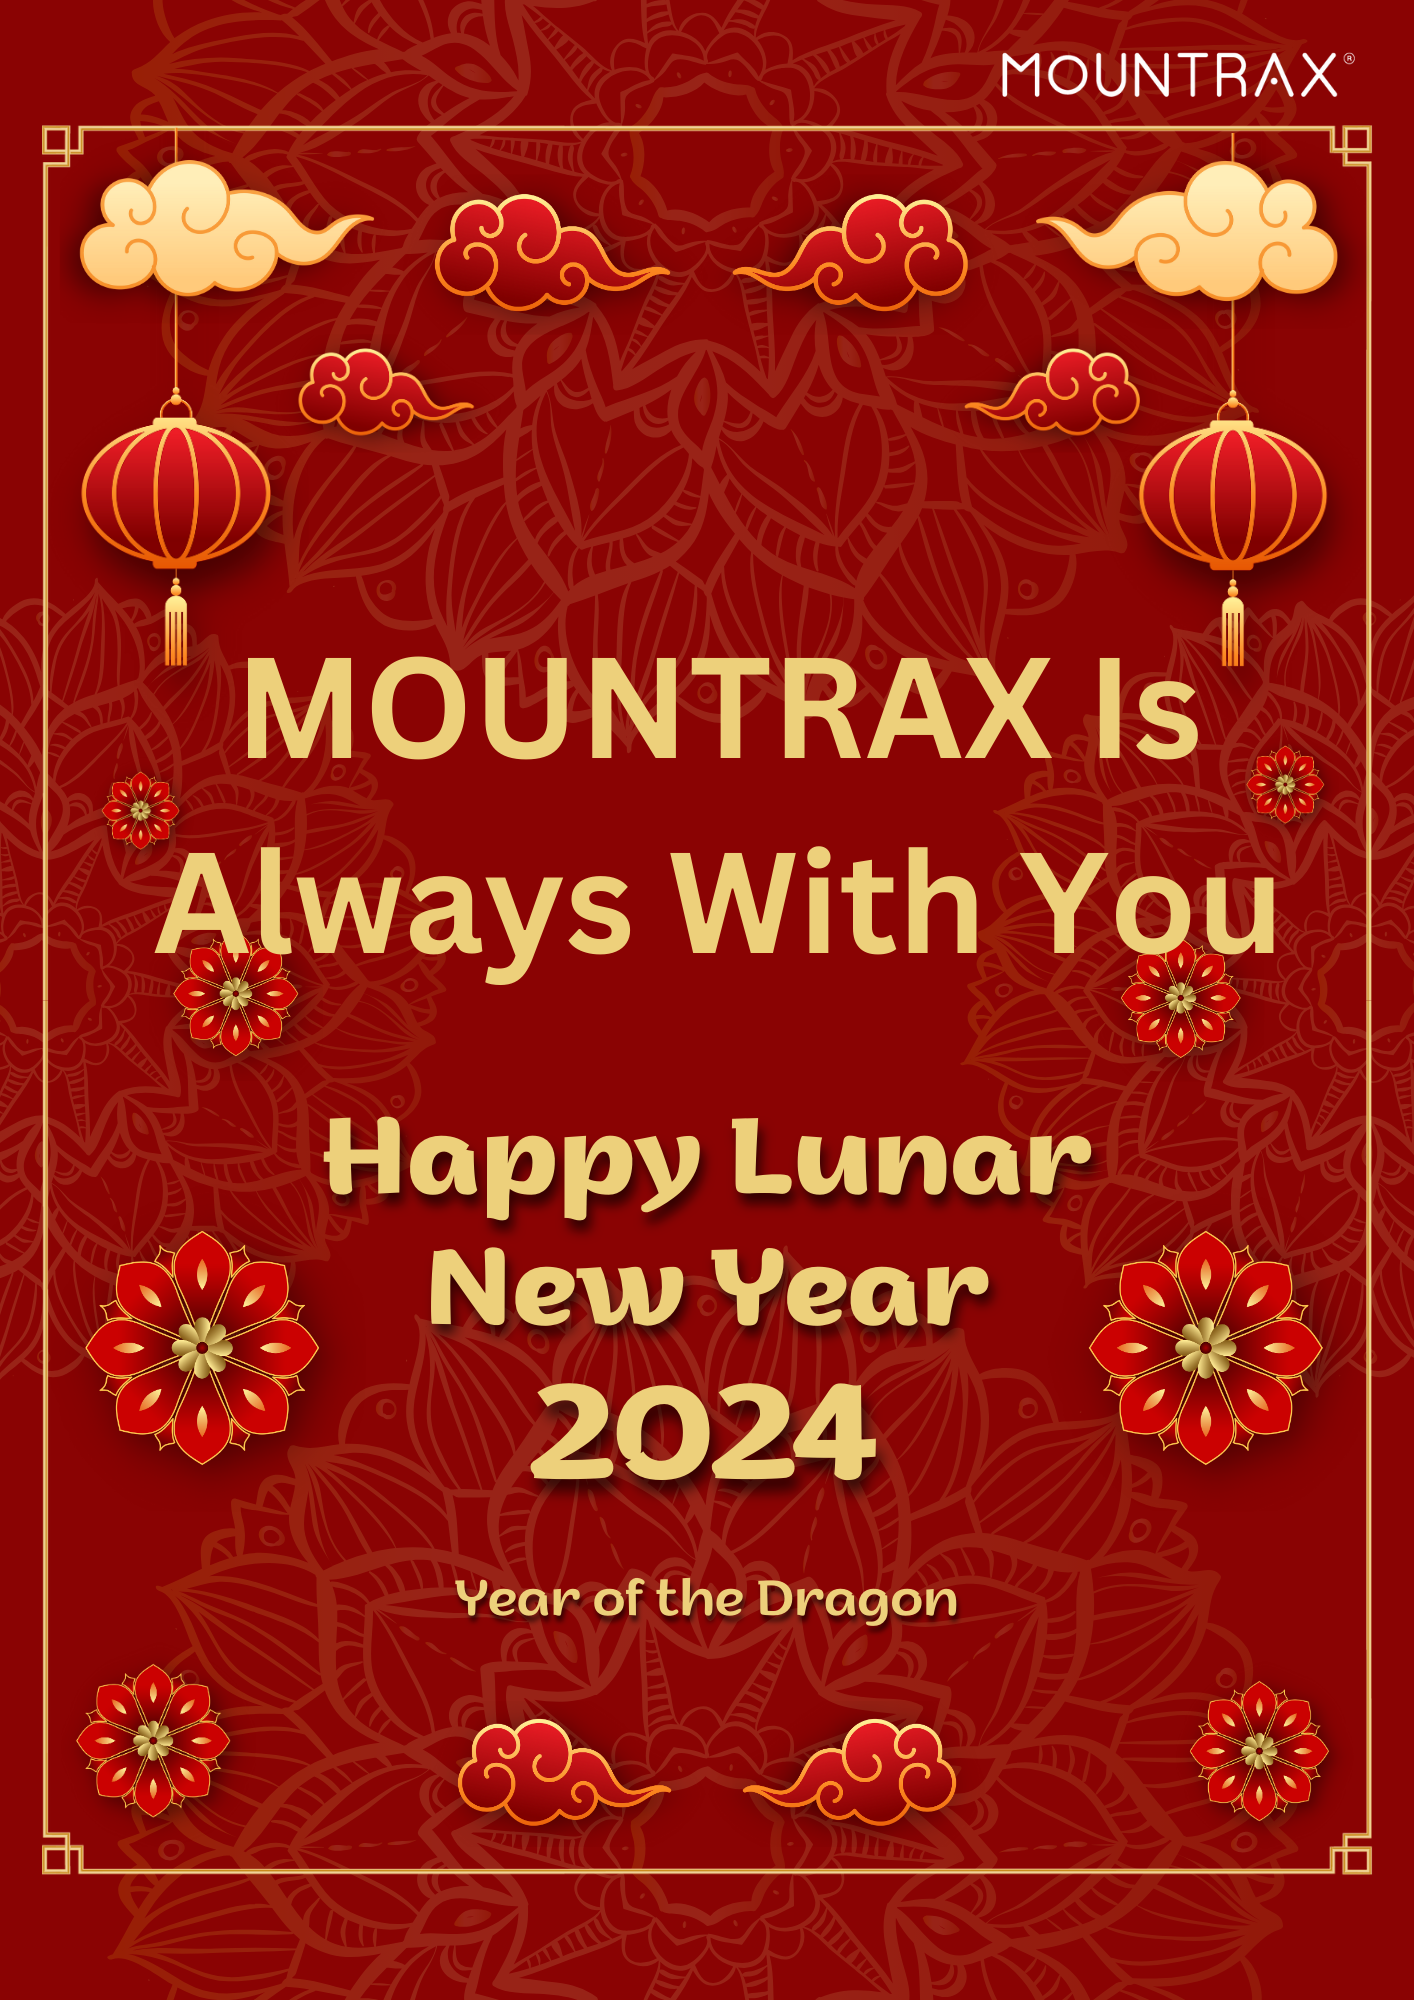 Celebrate Chinese New Year With A Gift from MOUNTRAX